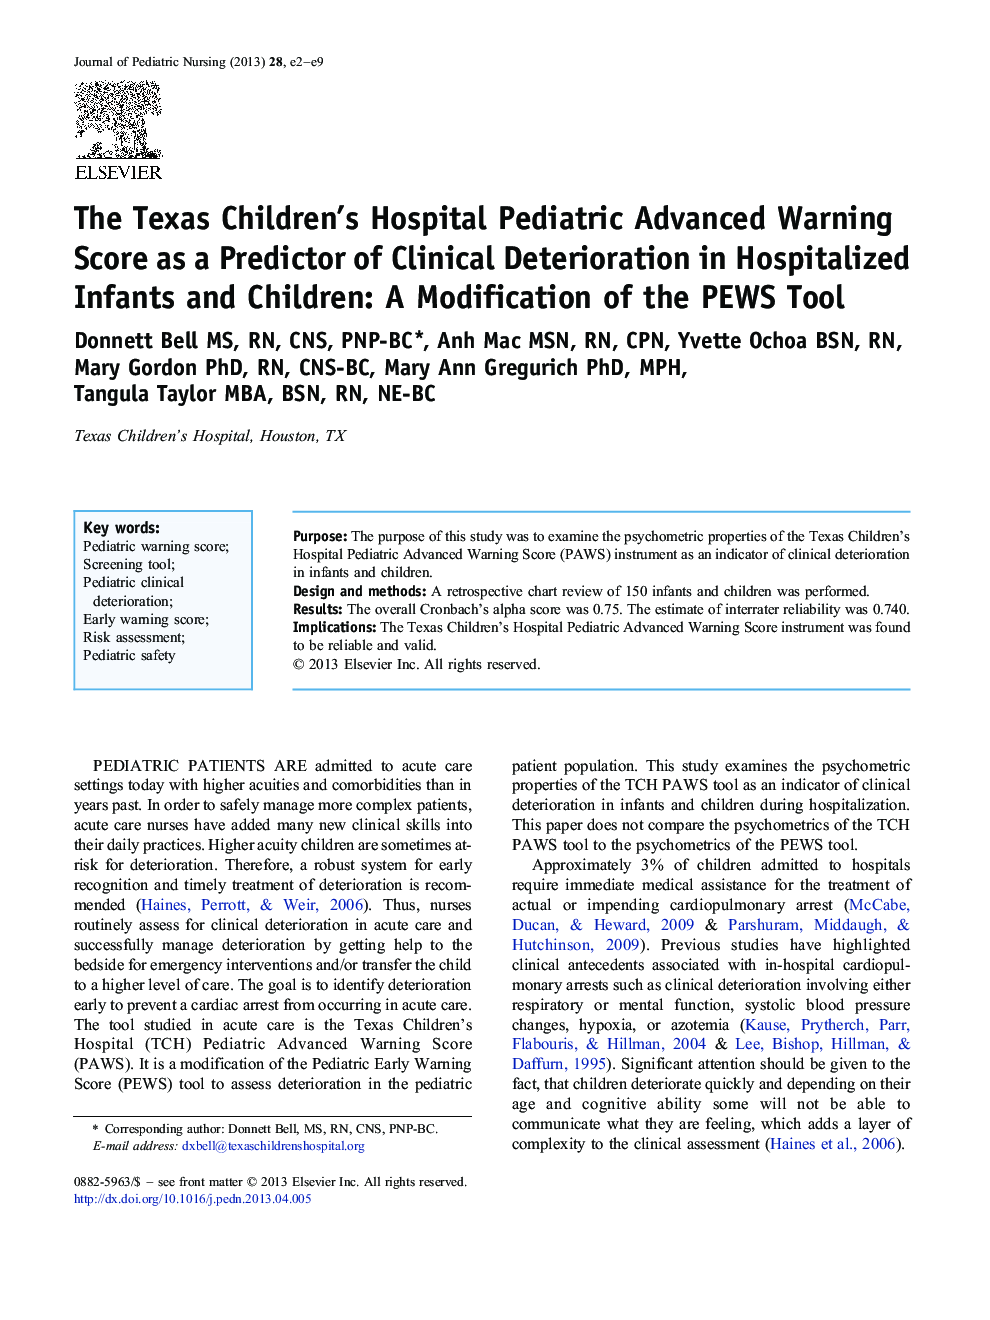 The Texas Children’s Hospital Pediatric Advanced Warning Score as a Predictor of Clinical Deterioration in Hospitalized Infants and Children: A Modification of the PEWS Tool